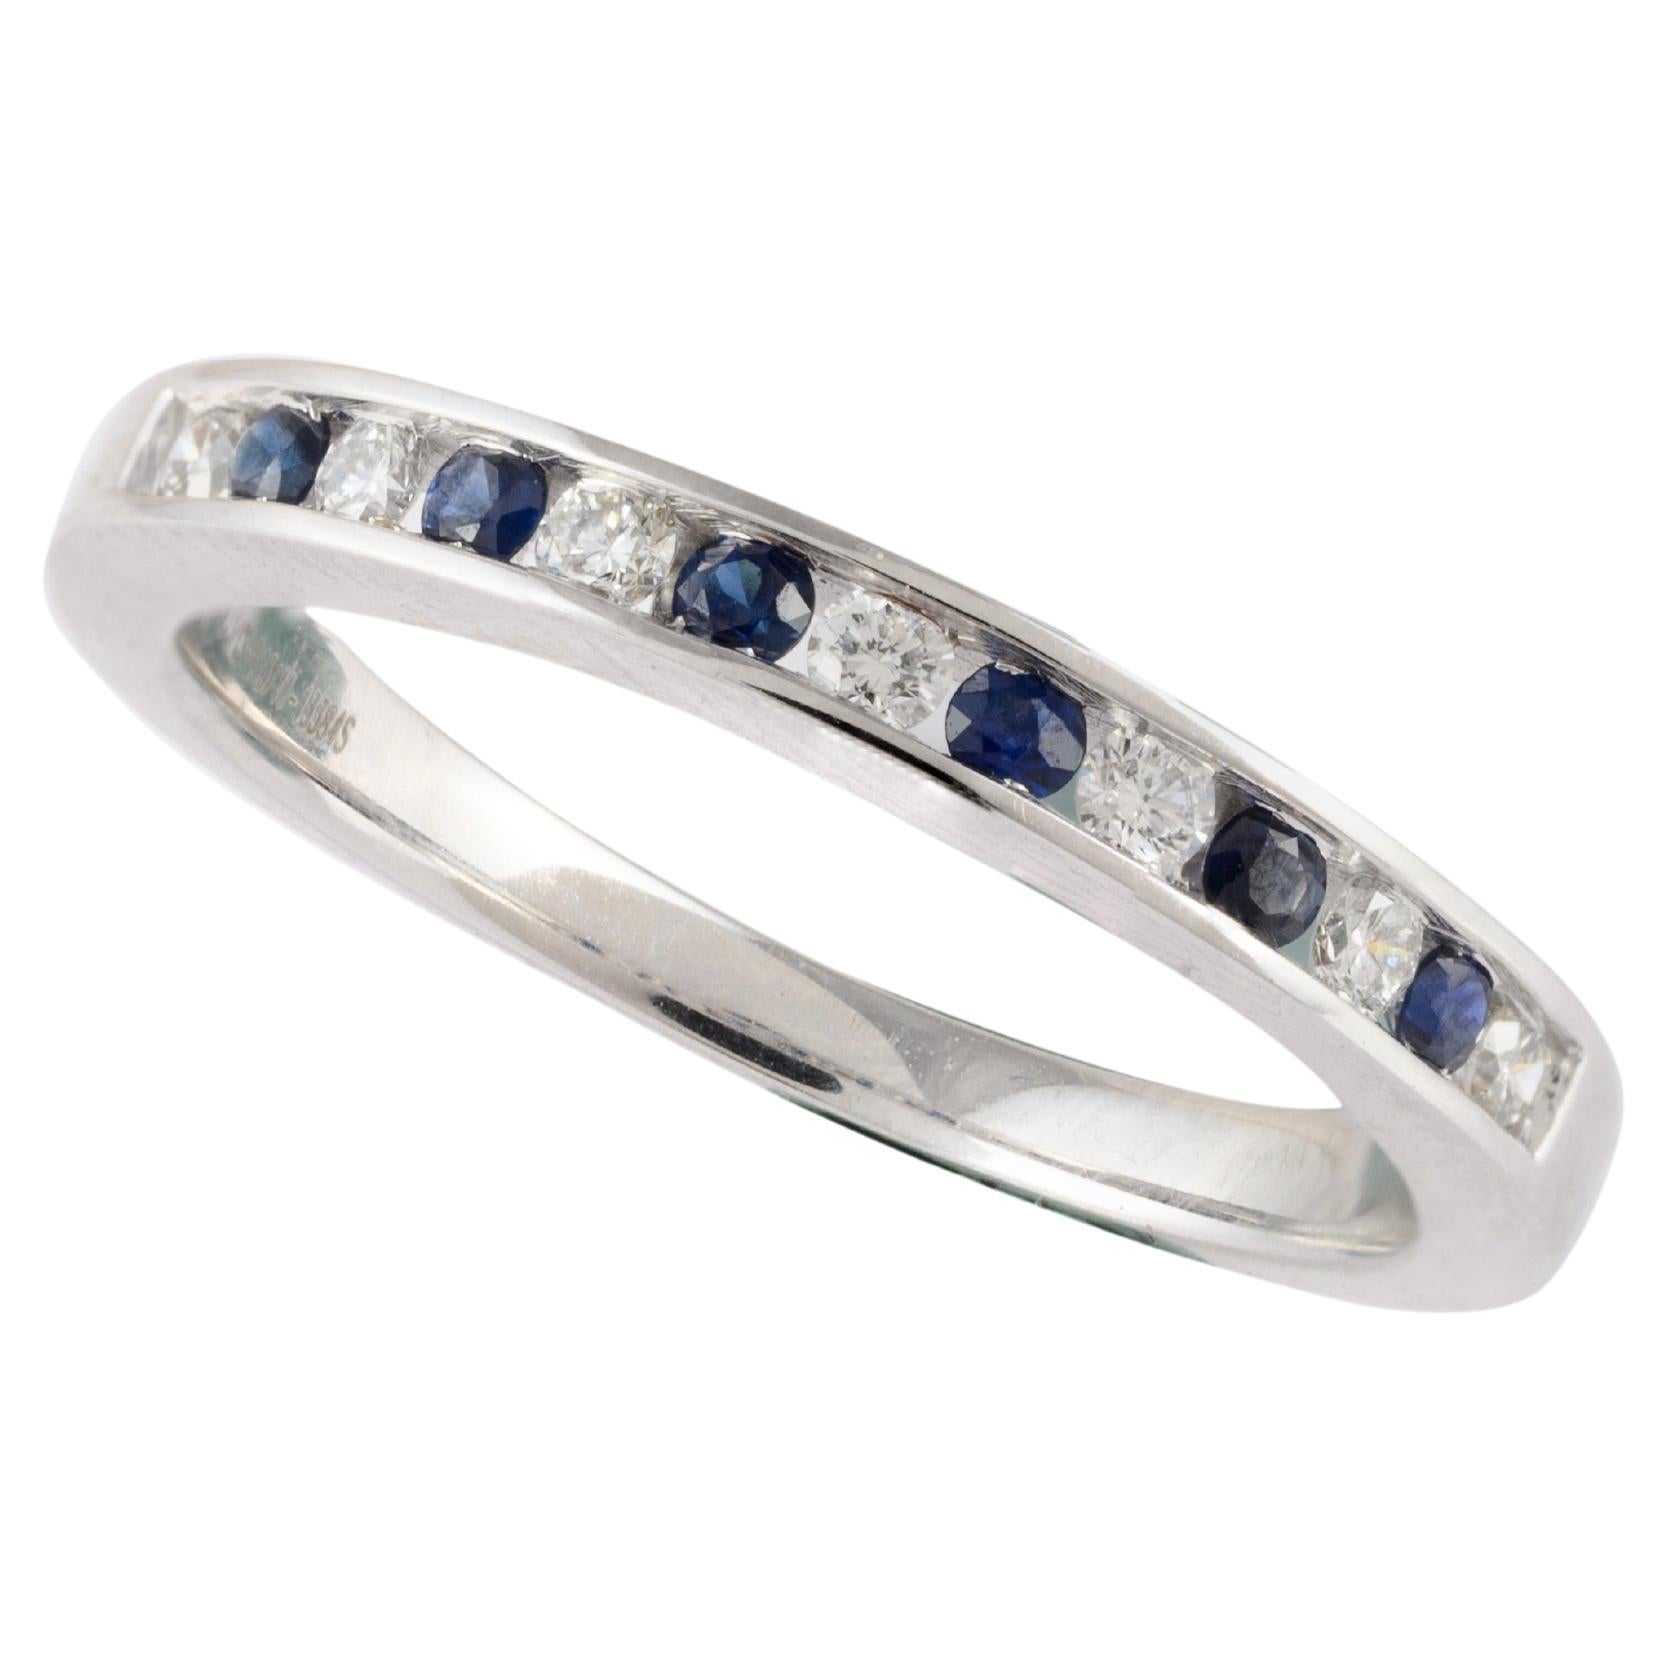 For Sale:  Brilliant Cut Diamond Sapphire Eternity Ring Studded in 18kt Solid White Gold